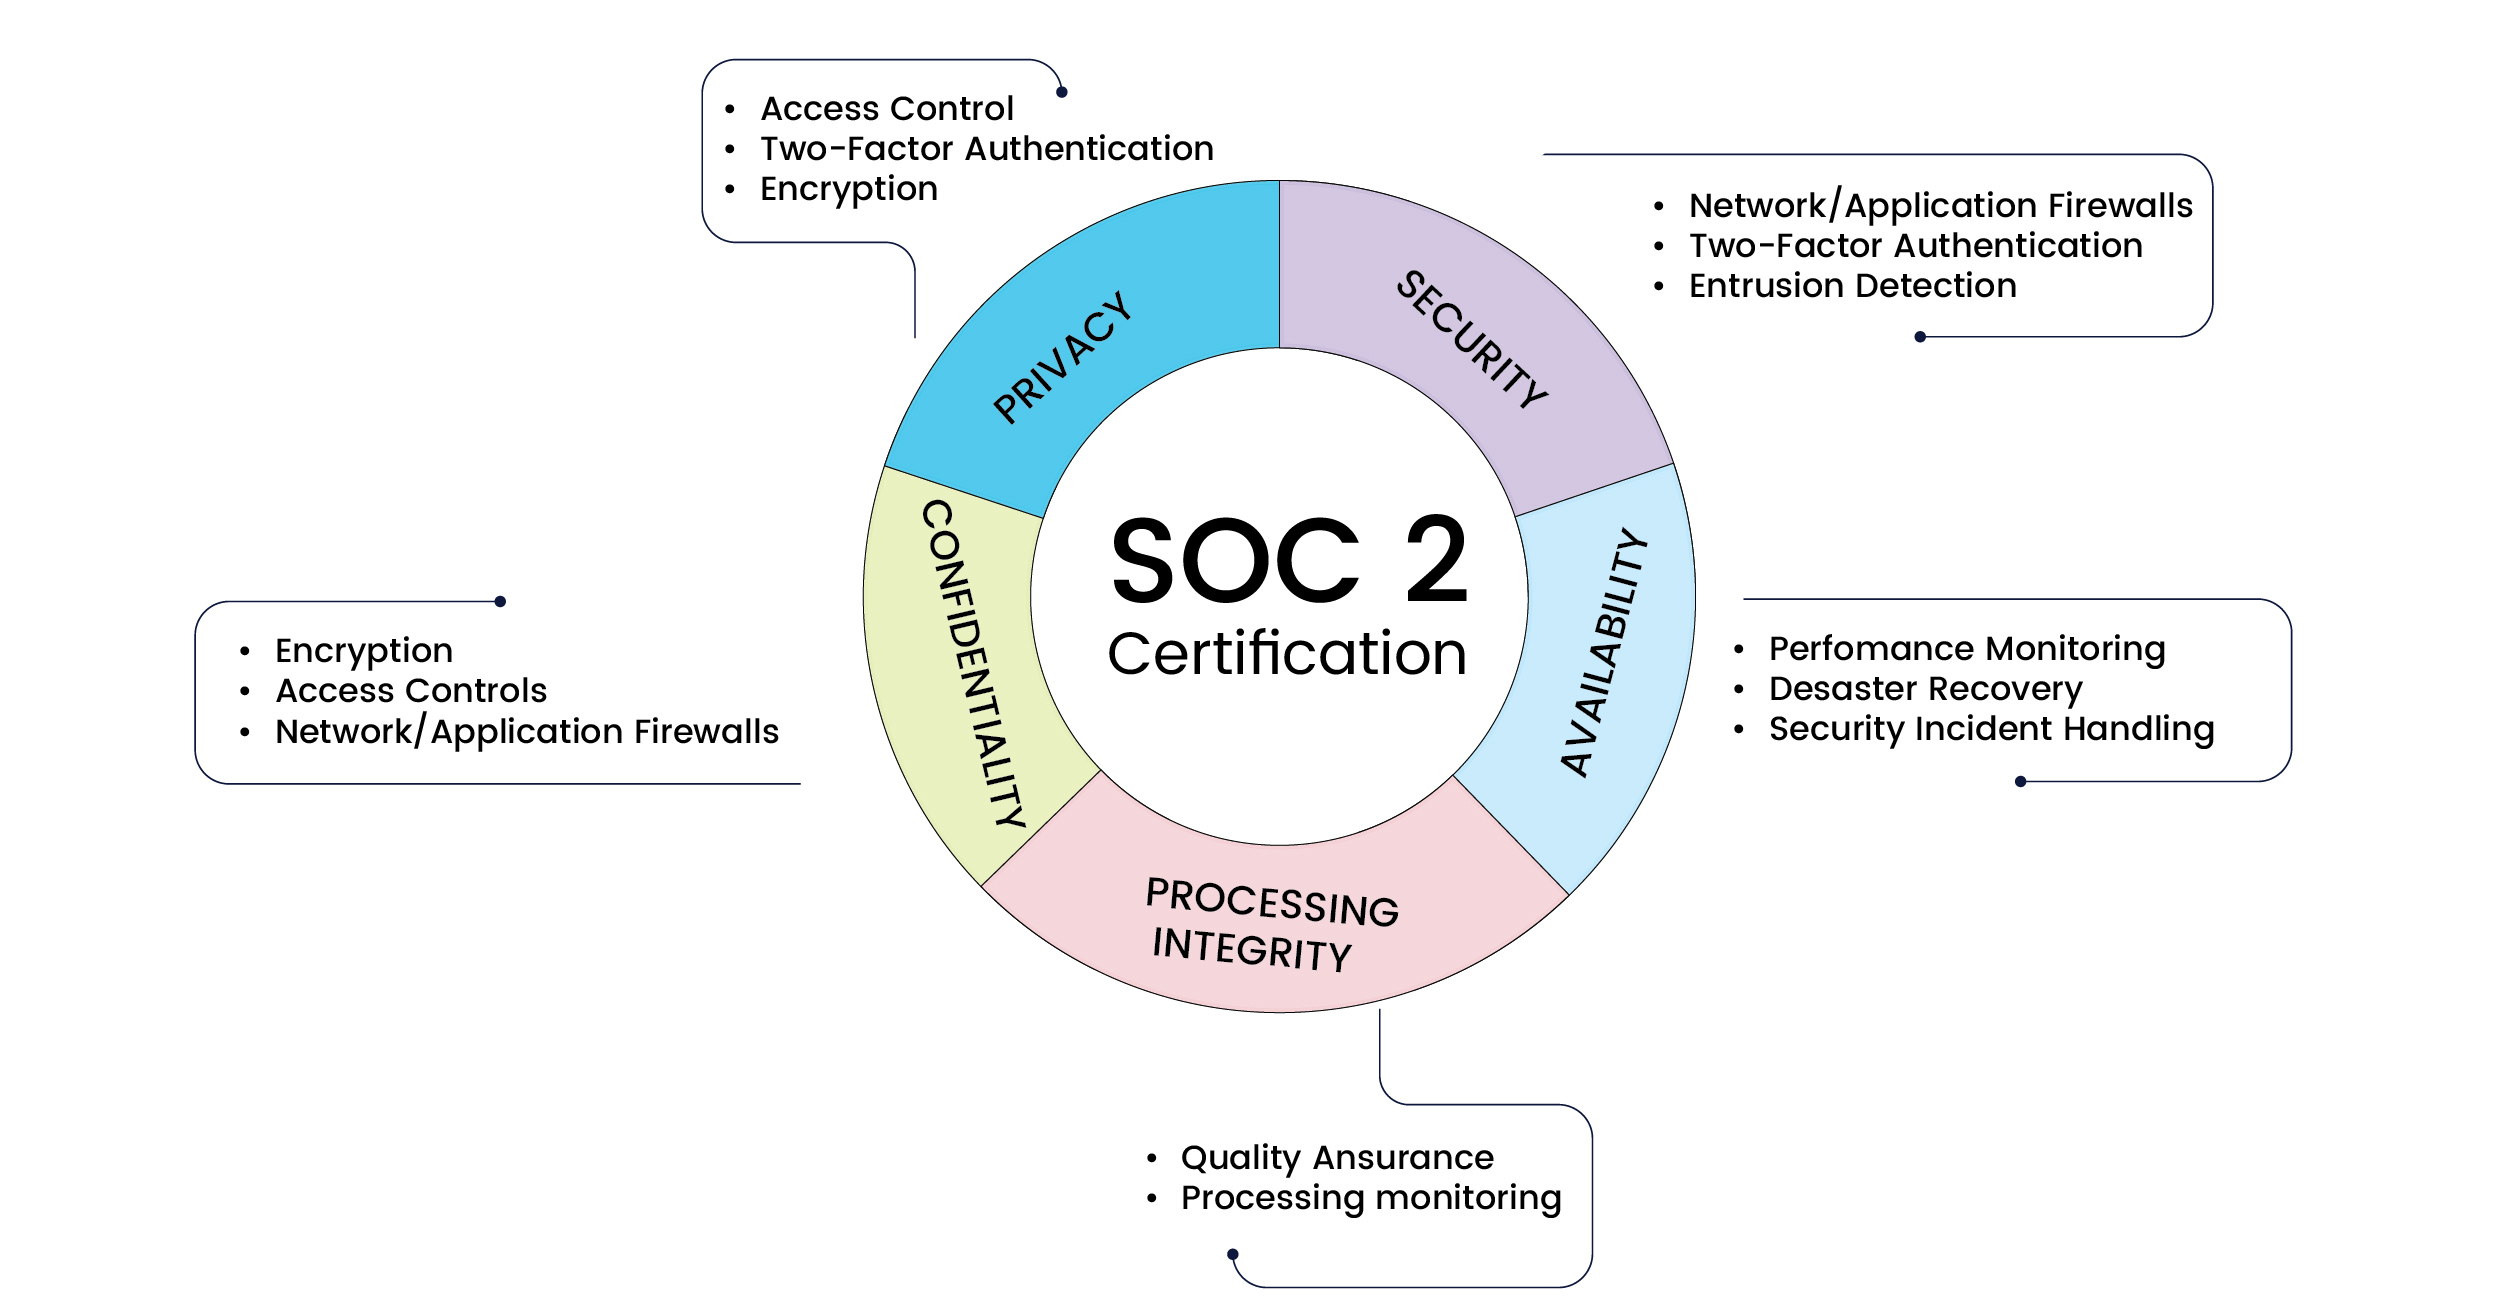 The key components of SOC 2 certification